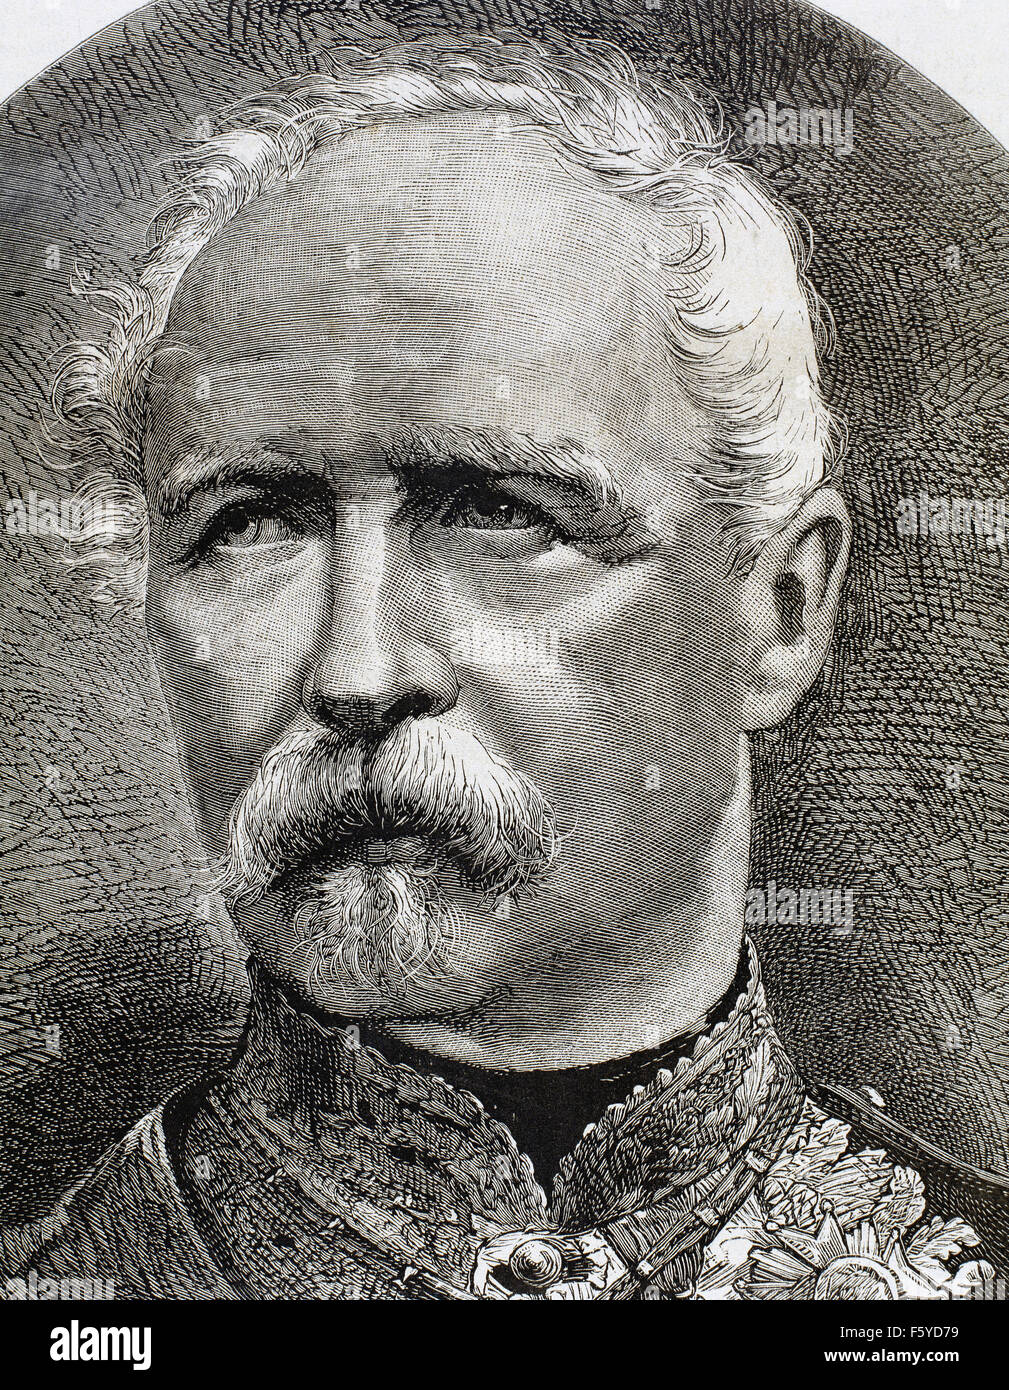 Patrice de MacMahon, 1st Duke of Magenta (1808-1893). French general and politician with the distinction Marshal of France. 3rd President of the France (1873-1875). Portrait. Engraving, 19th century. Stock Photo